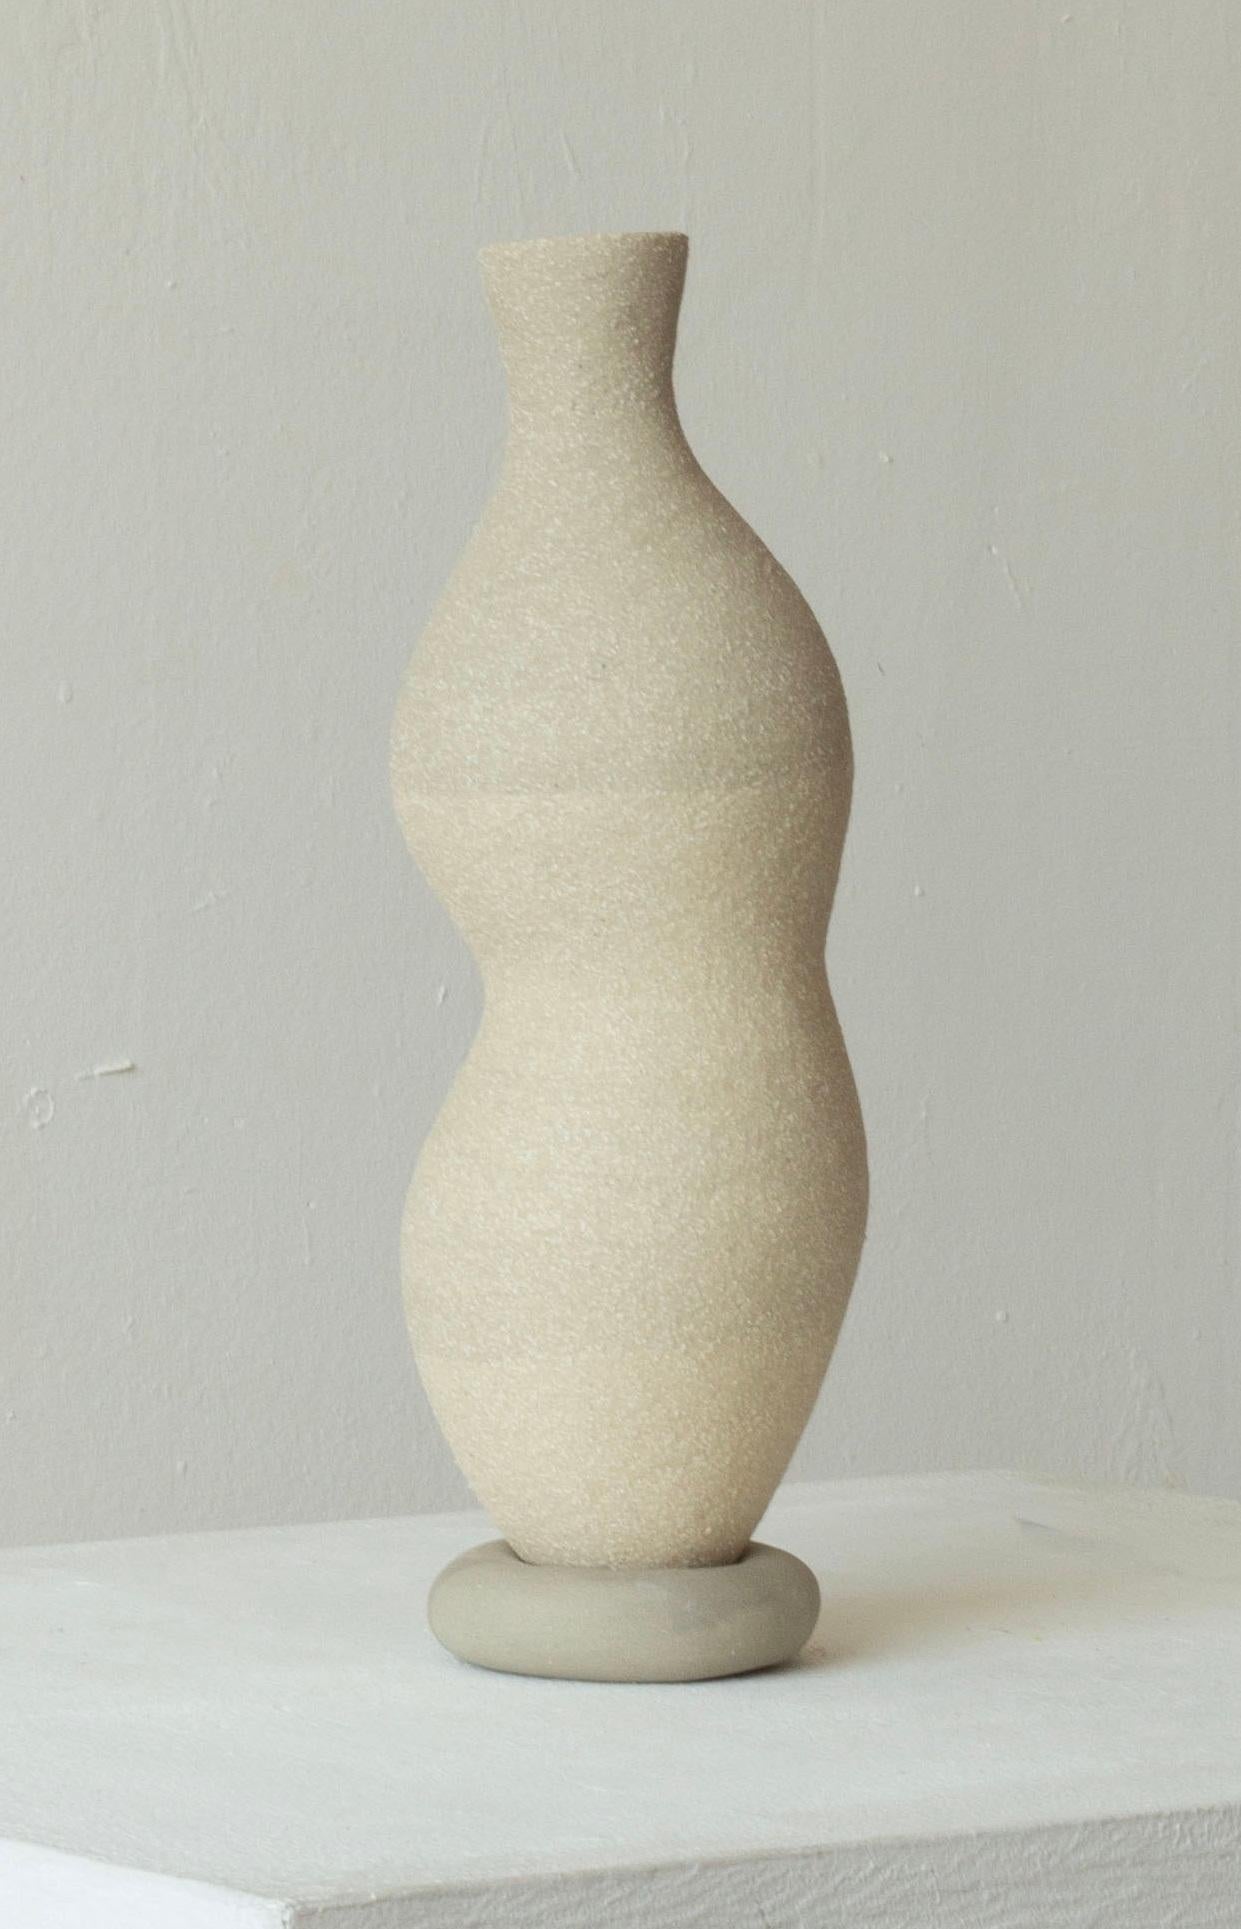 Woman 220 Vase by Karina Smagulova
One of a Kind.
Dimensions: Ø 9 x H 27 cm.
Materials: Grey stoneware.
​
With an Armenian and Kazakhstan heritage, Karina Smagulova was born in Greece in 1995 and graduated with a diploma in Architecture from